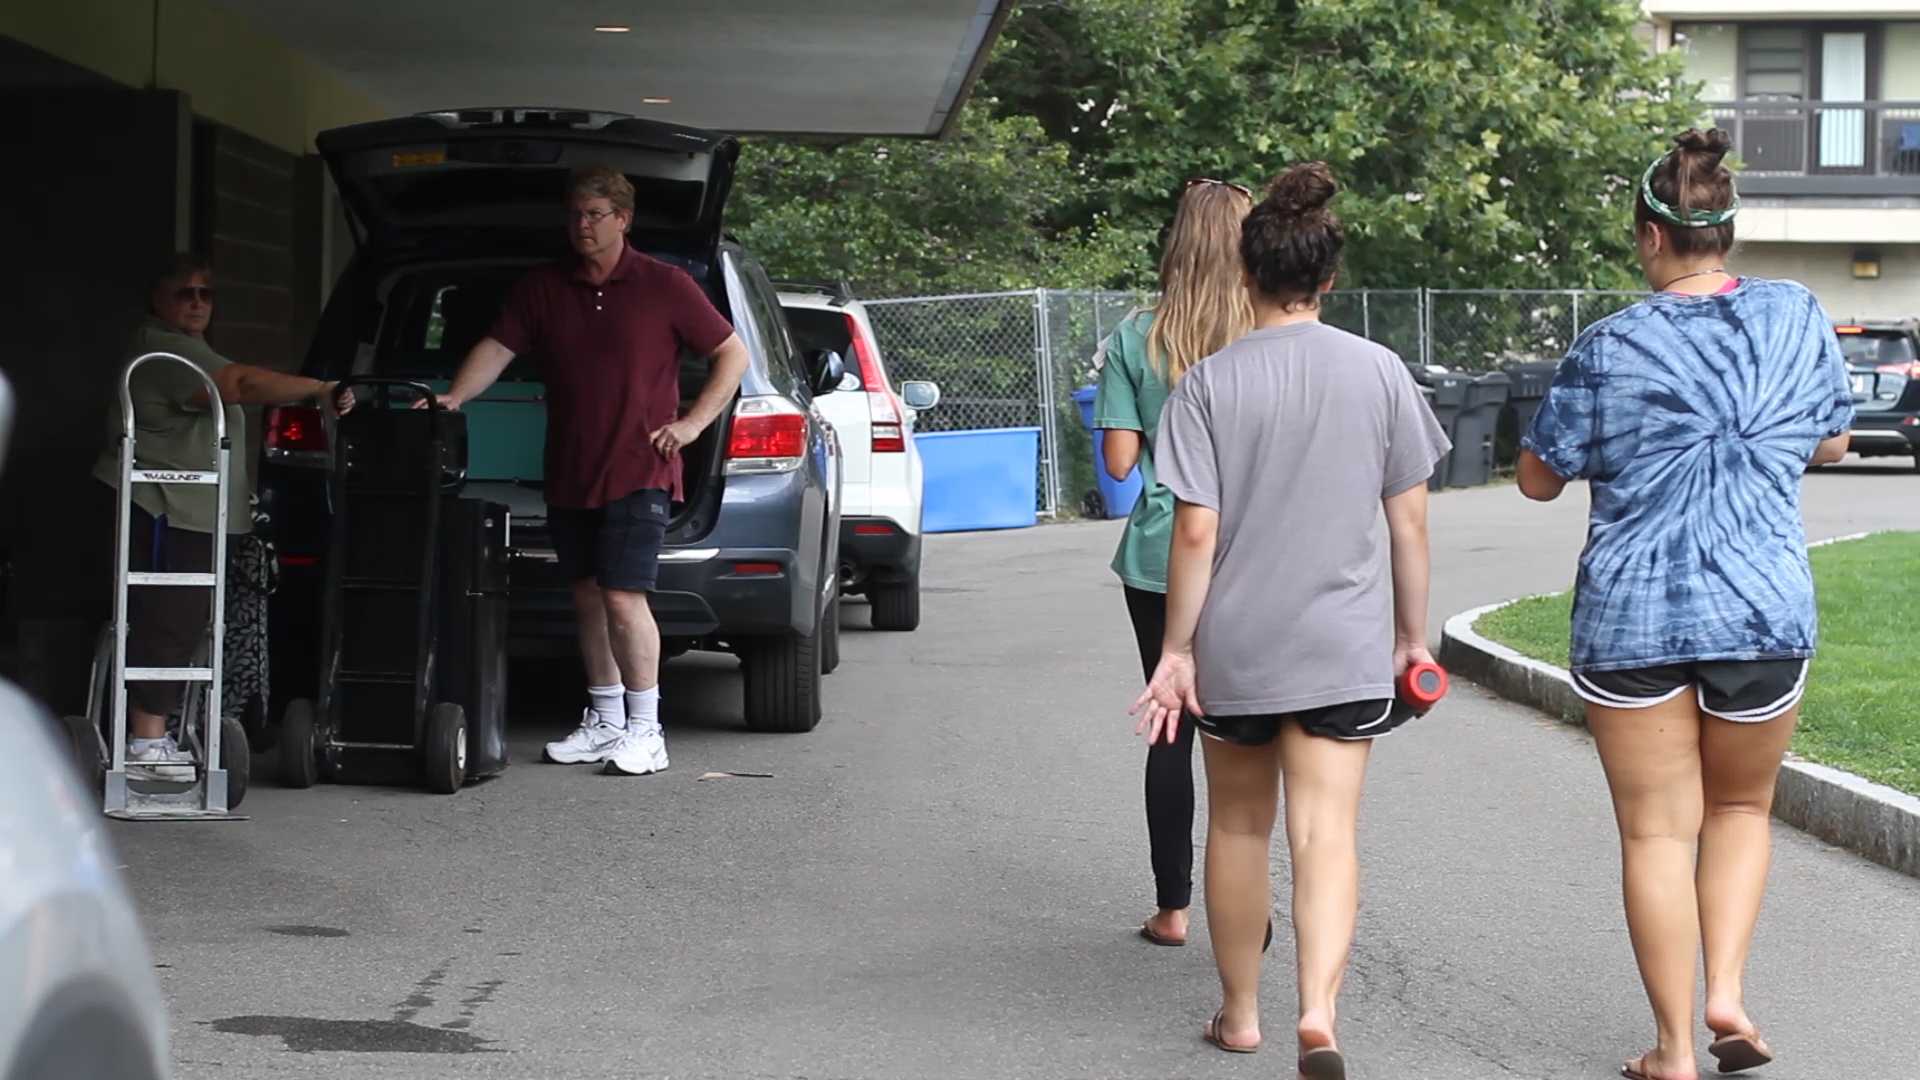 WATCH: Fall 2018 Move-In